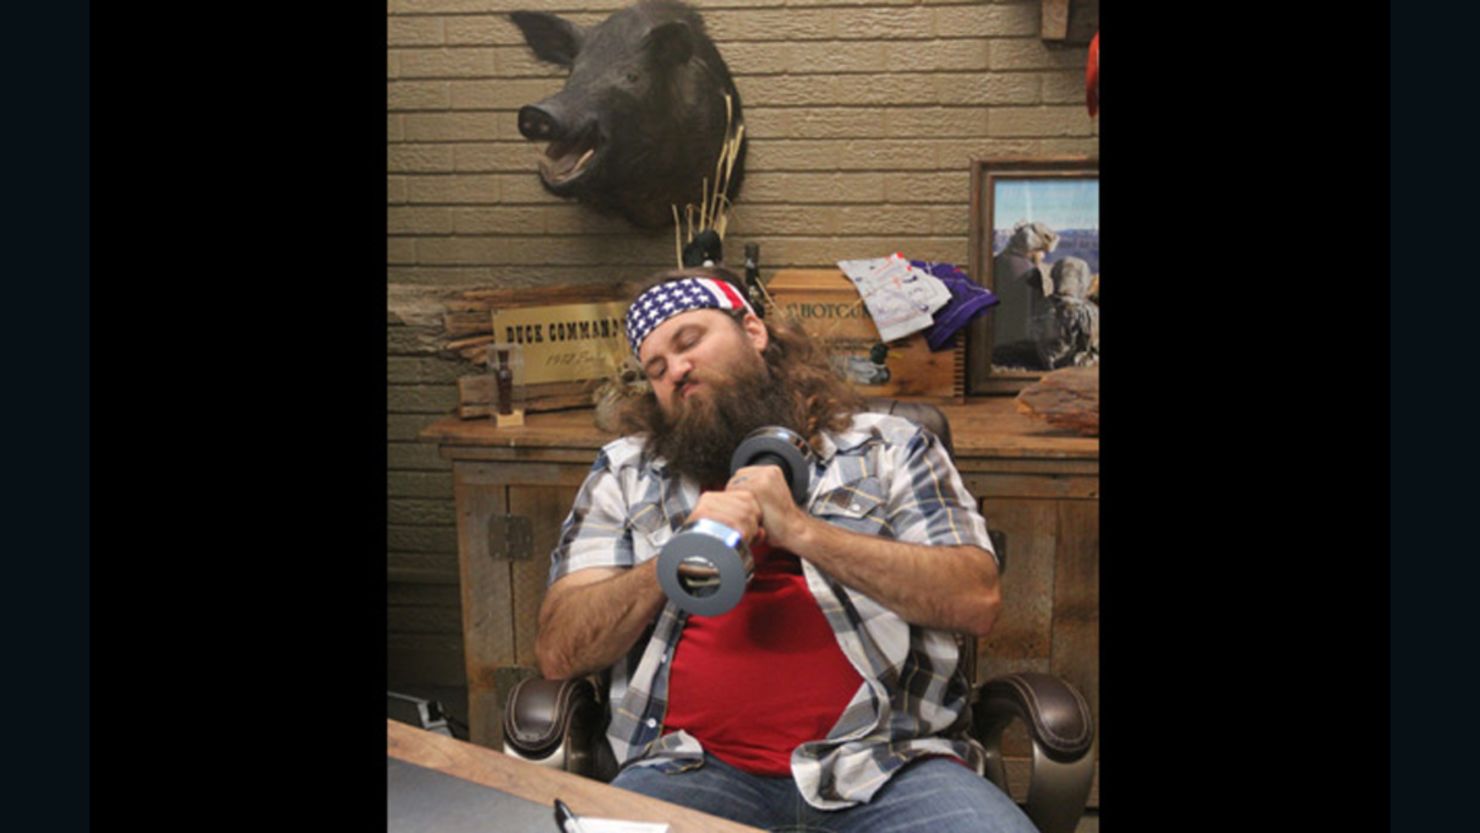 The third season of A&E's "Duck Dynasty" returned Wednesday night to 8.6 million viewers.